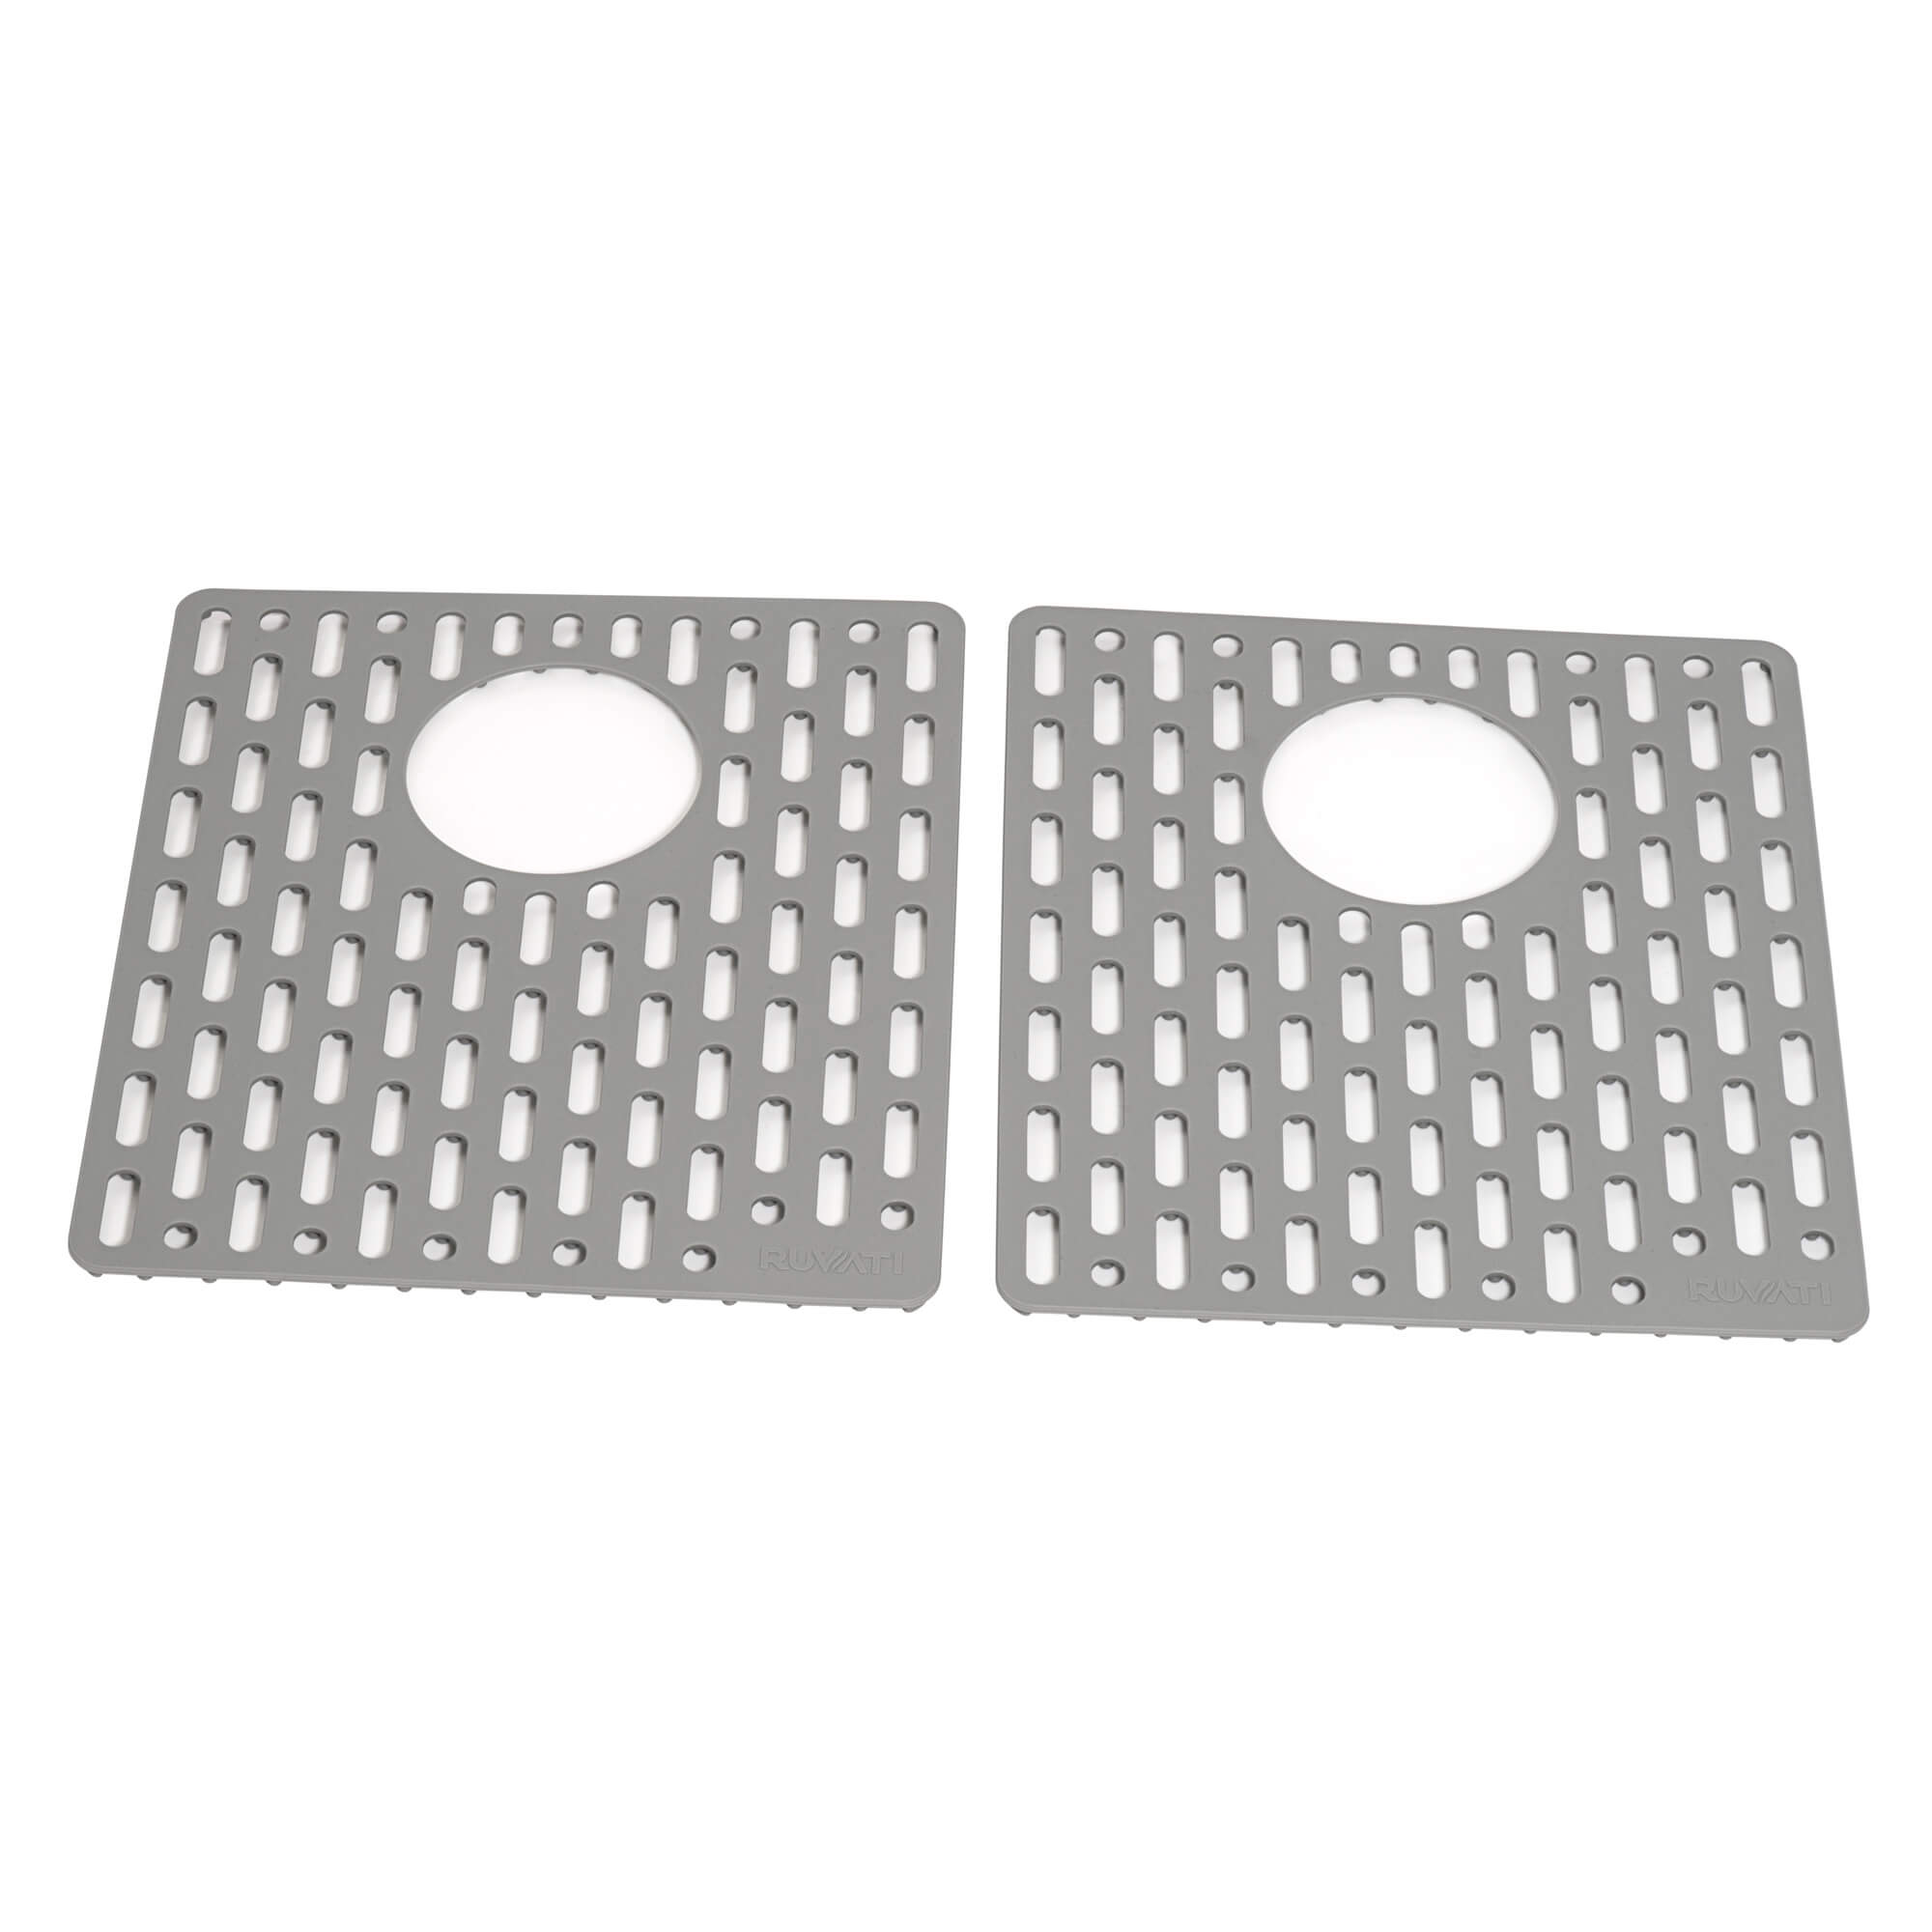 Ruvati Silicone Bottom Grid Sink Mat for RVG1385 and RVG2385 Sinks